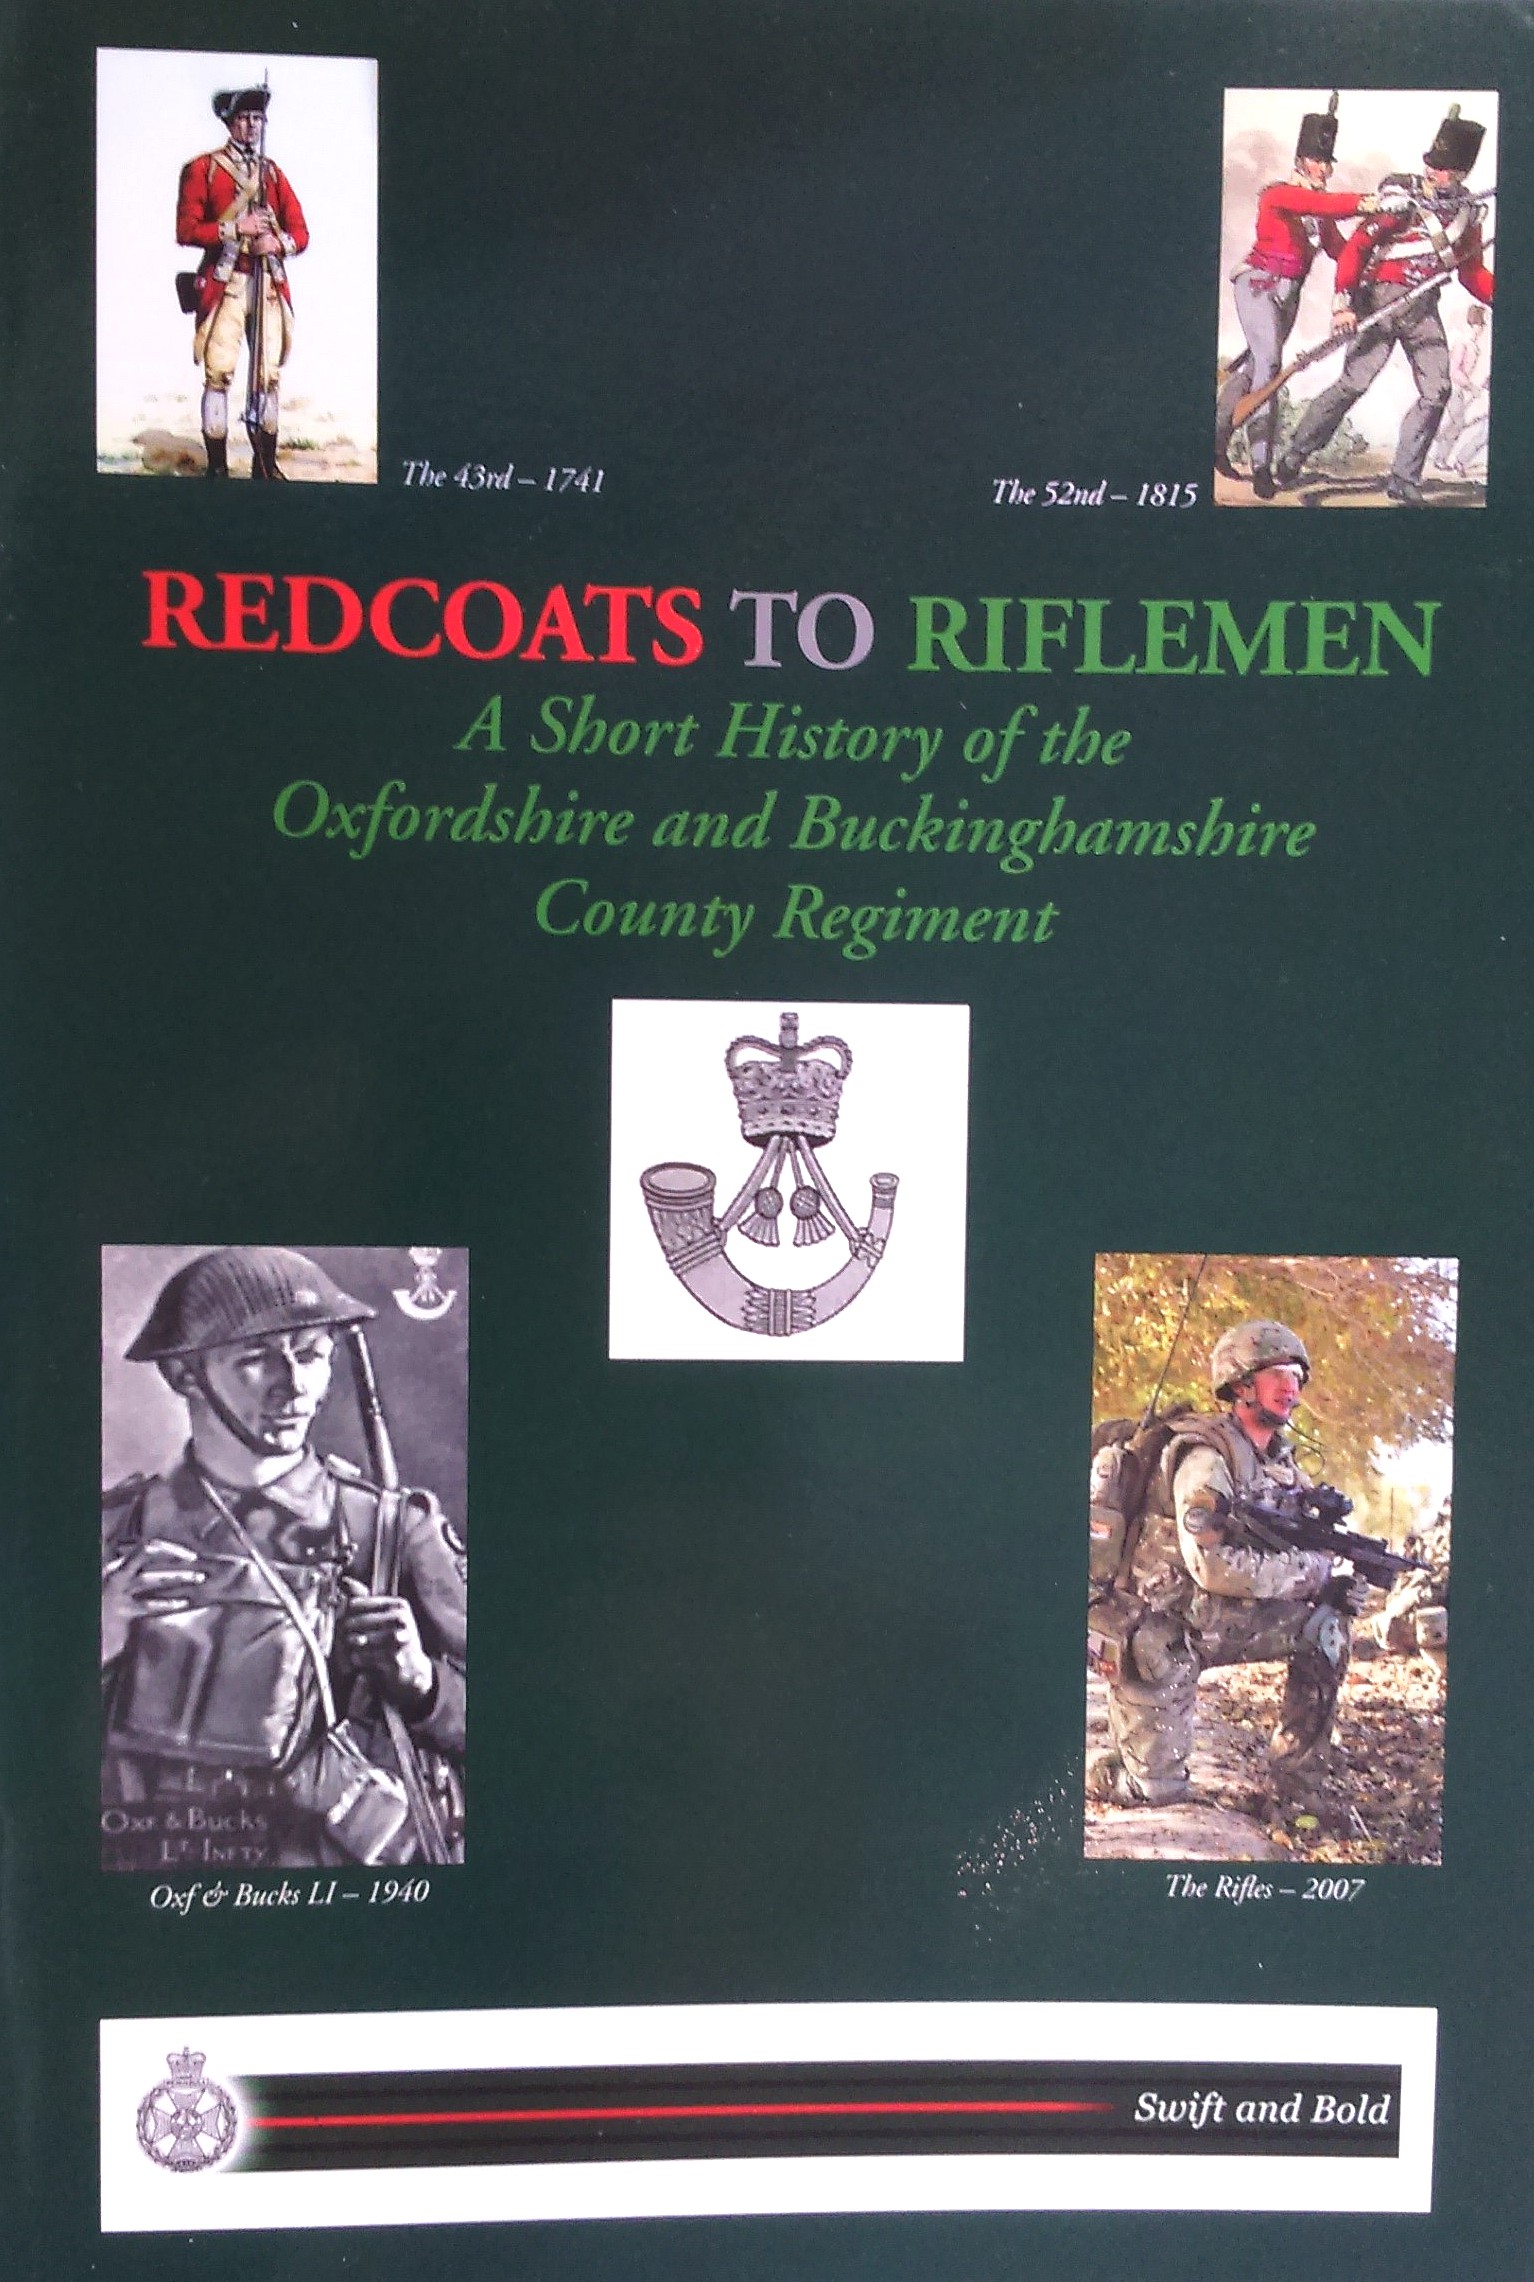 Redcoats to Riflemen: A Short History of the Oxfordshire and Buckinghamshire County Regiment